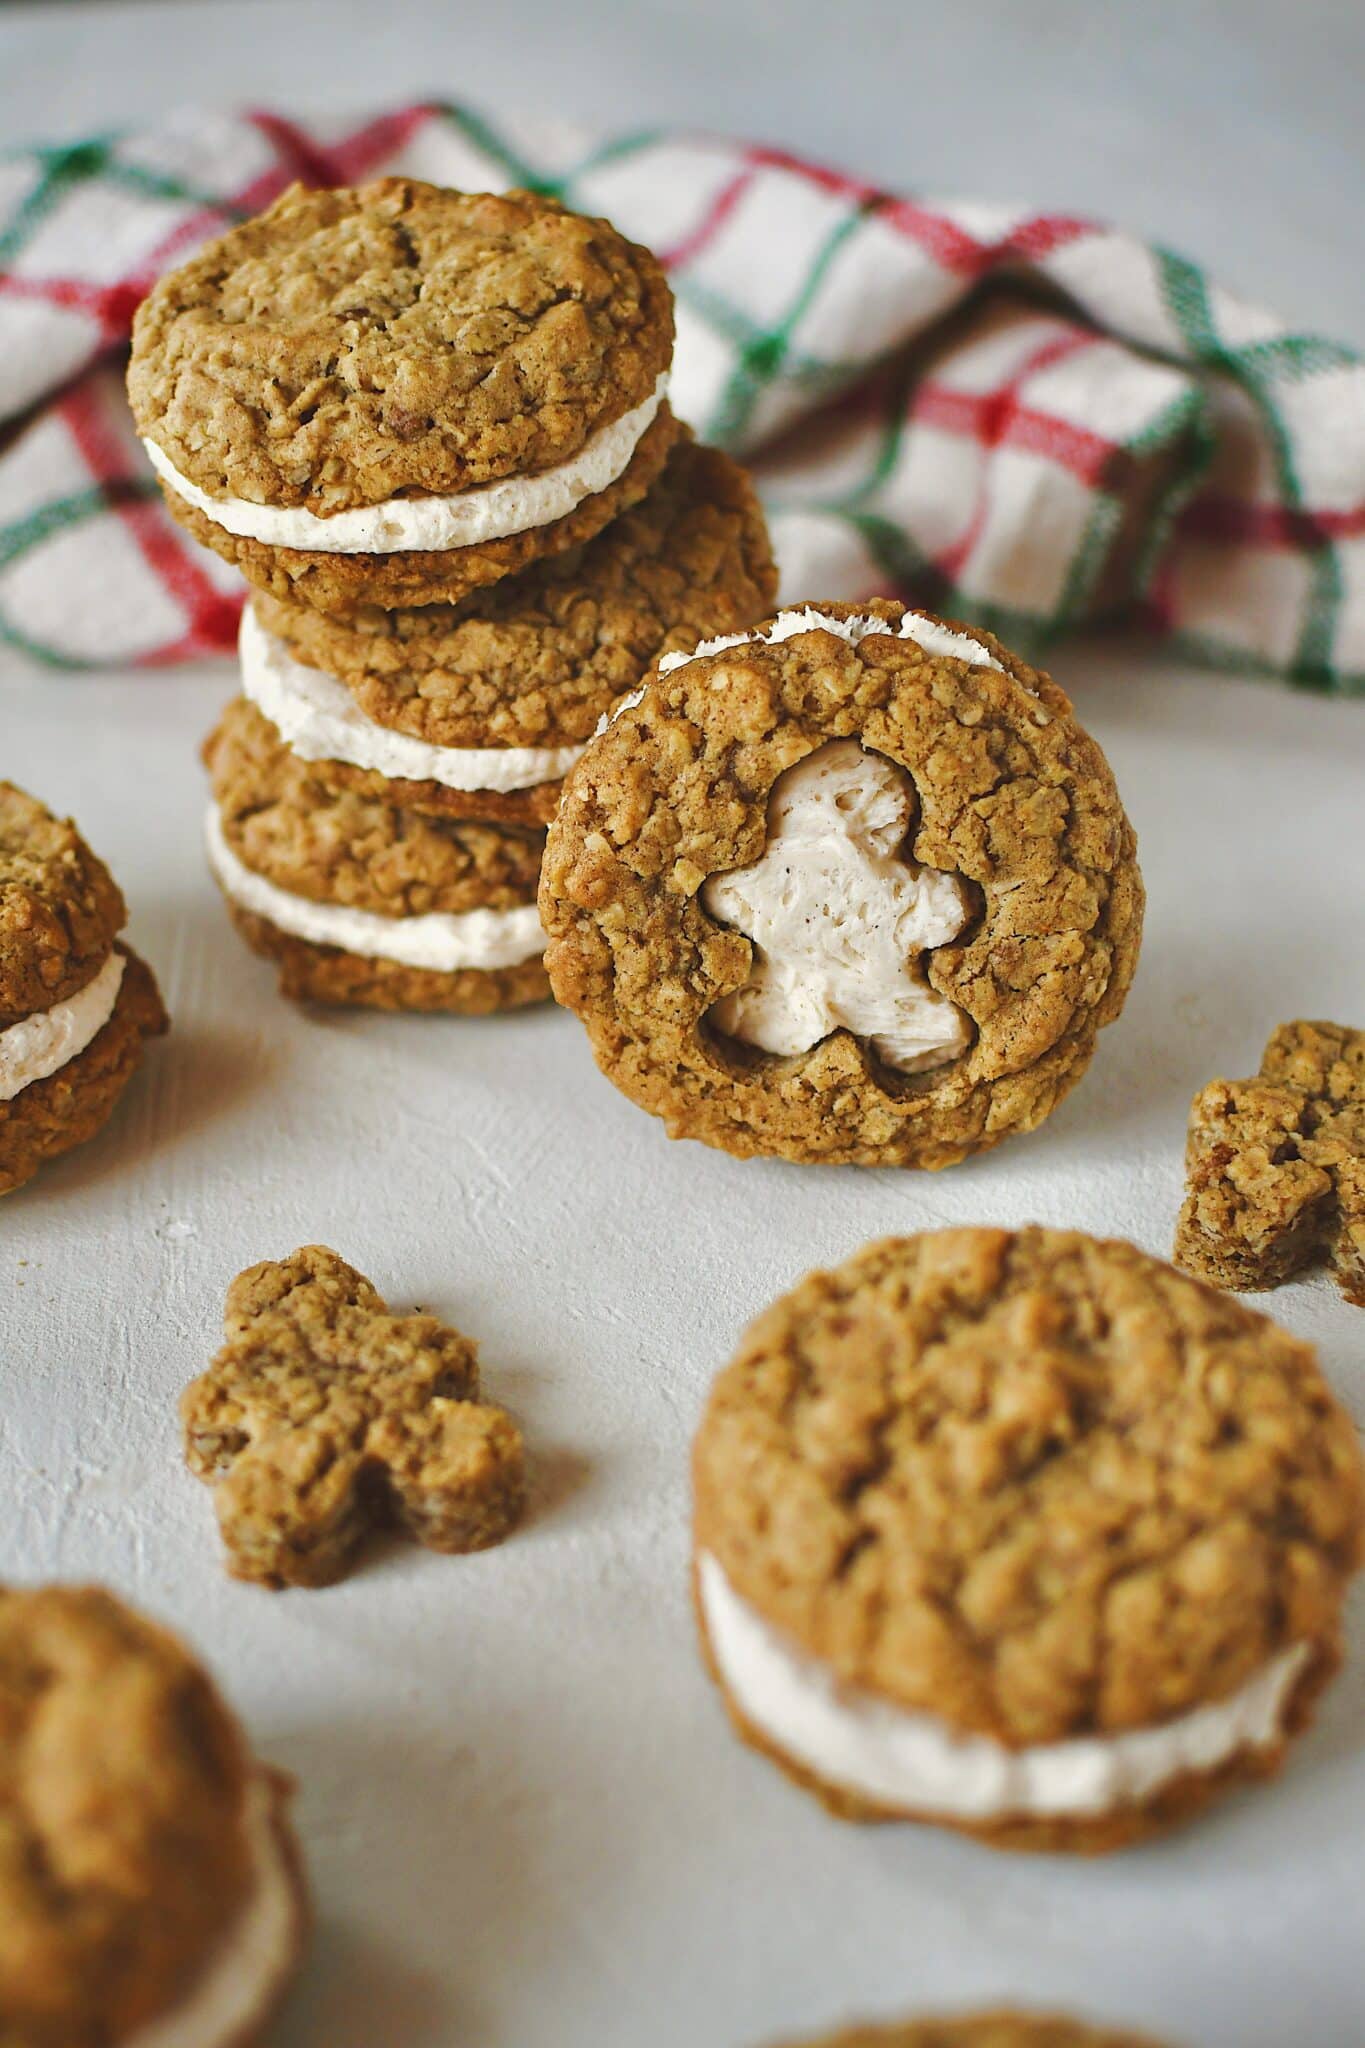 Gingerbread Oatmeal Cream Pie with the shape of gingerbread man cut out of one side and sandwiched together.